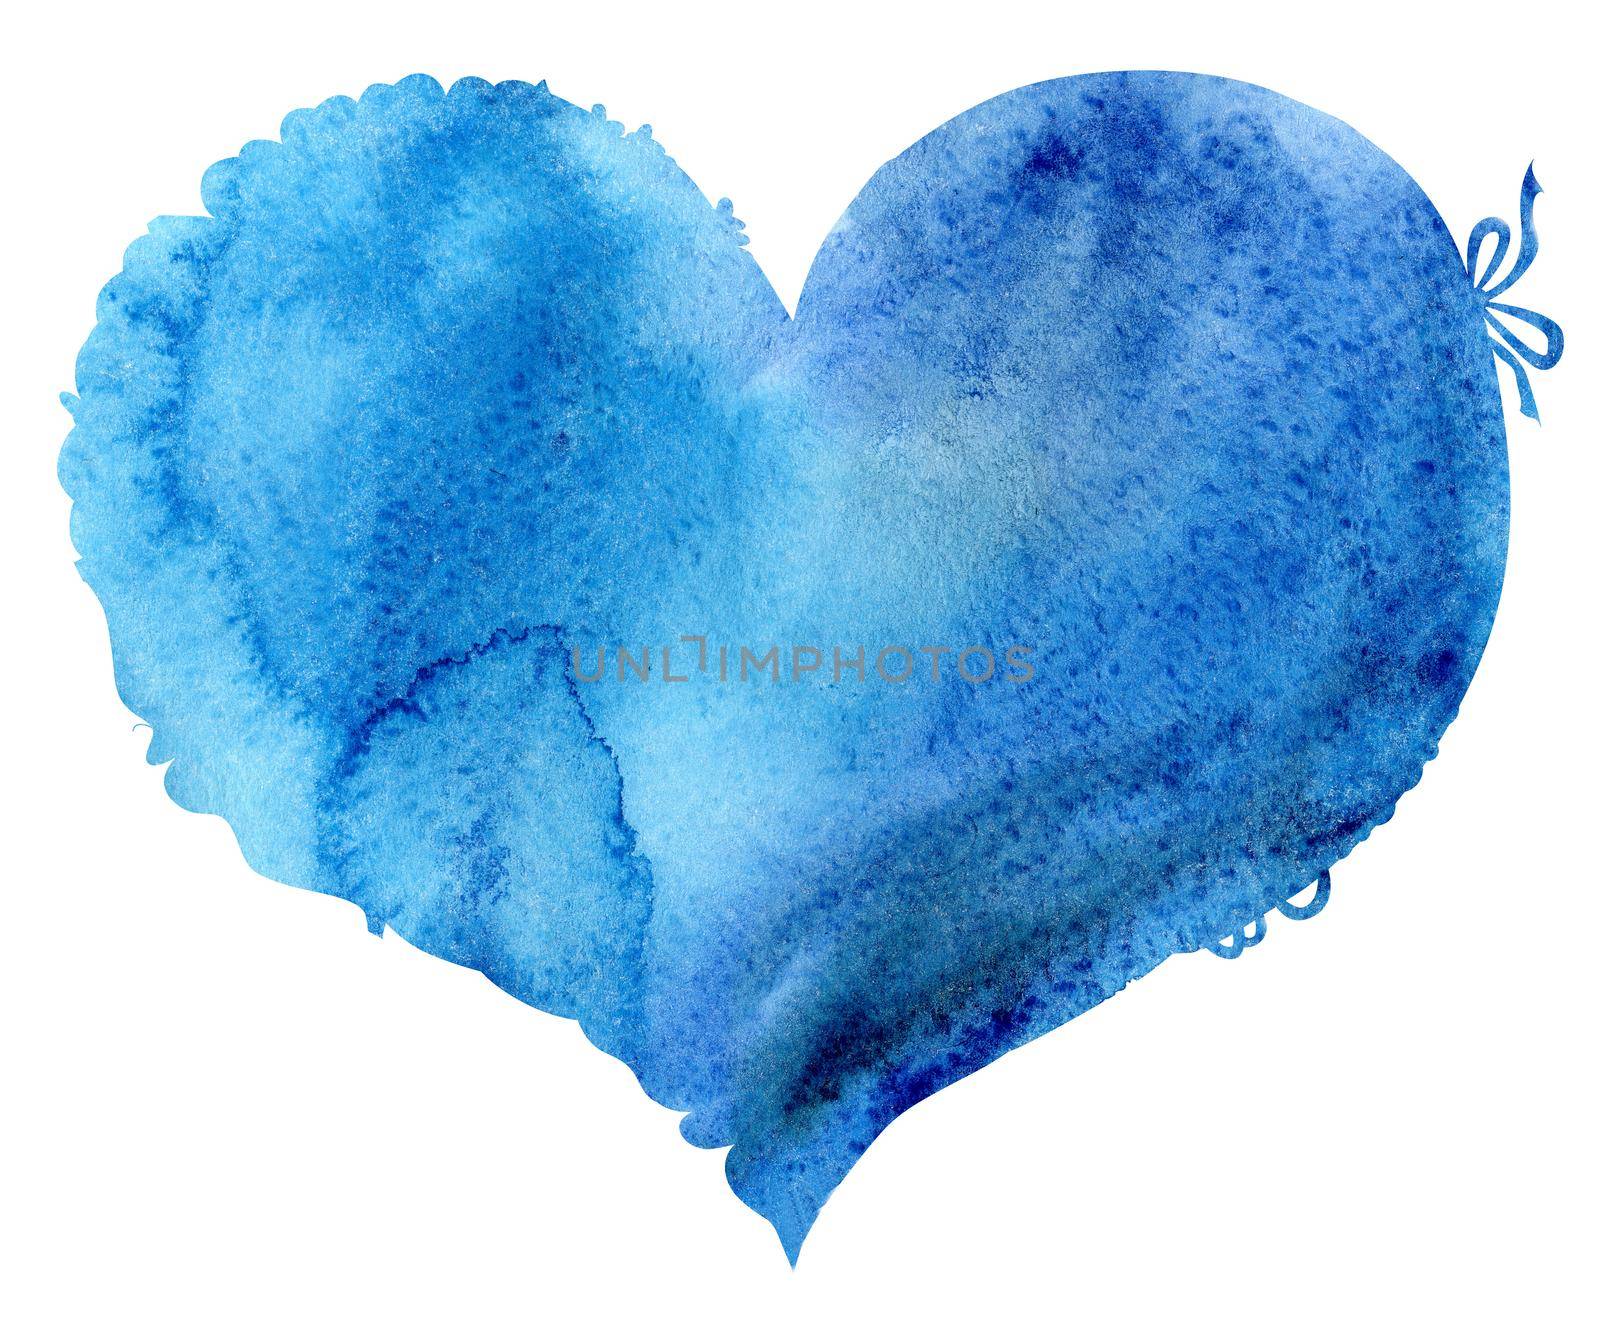 watercolor blue heart with a lace edge by NataOmsk